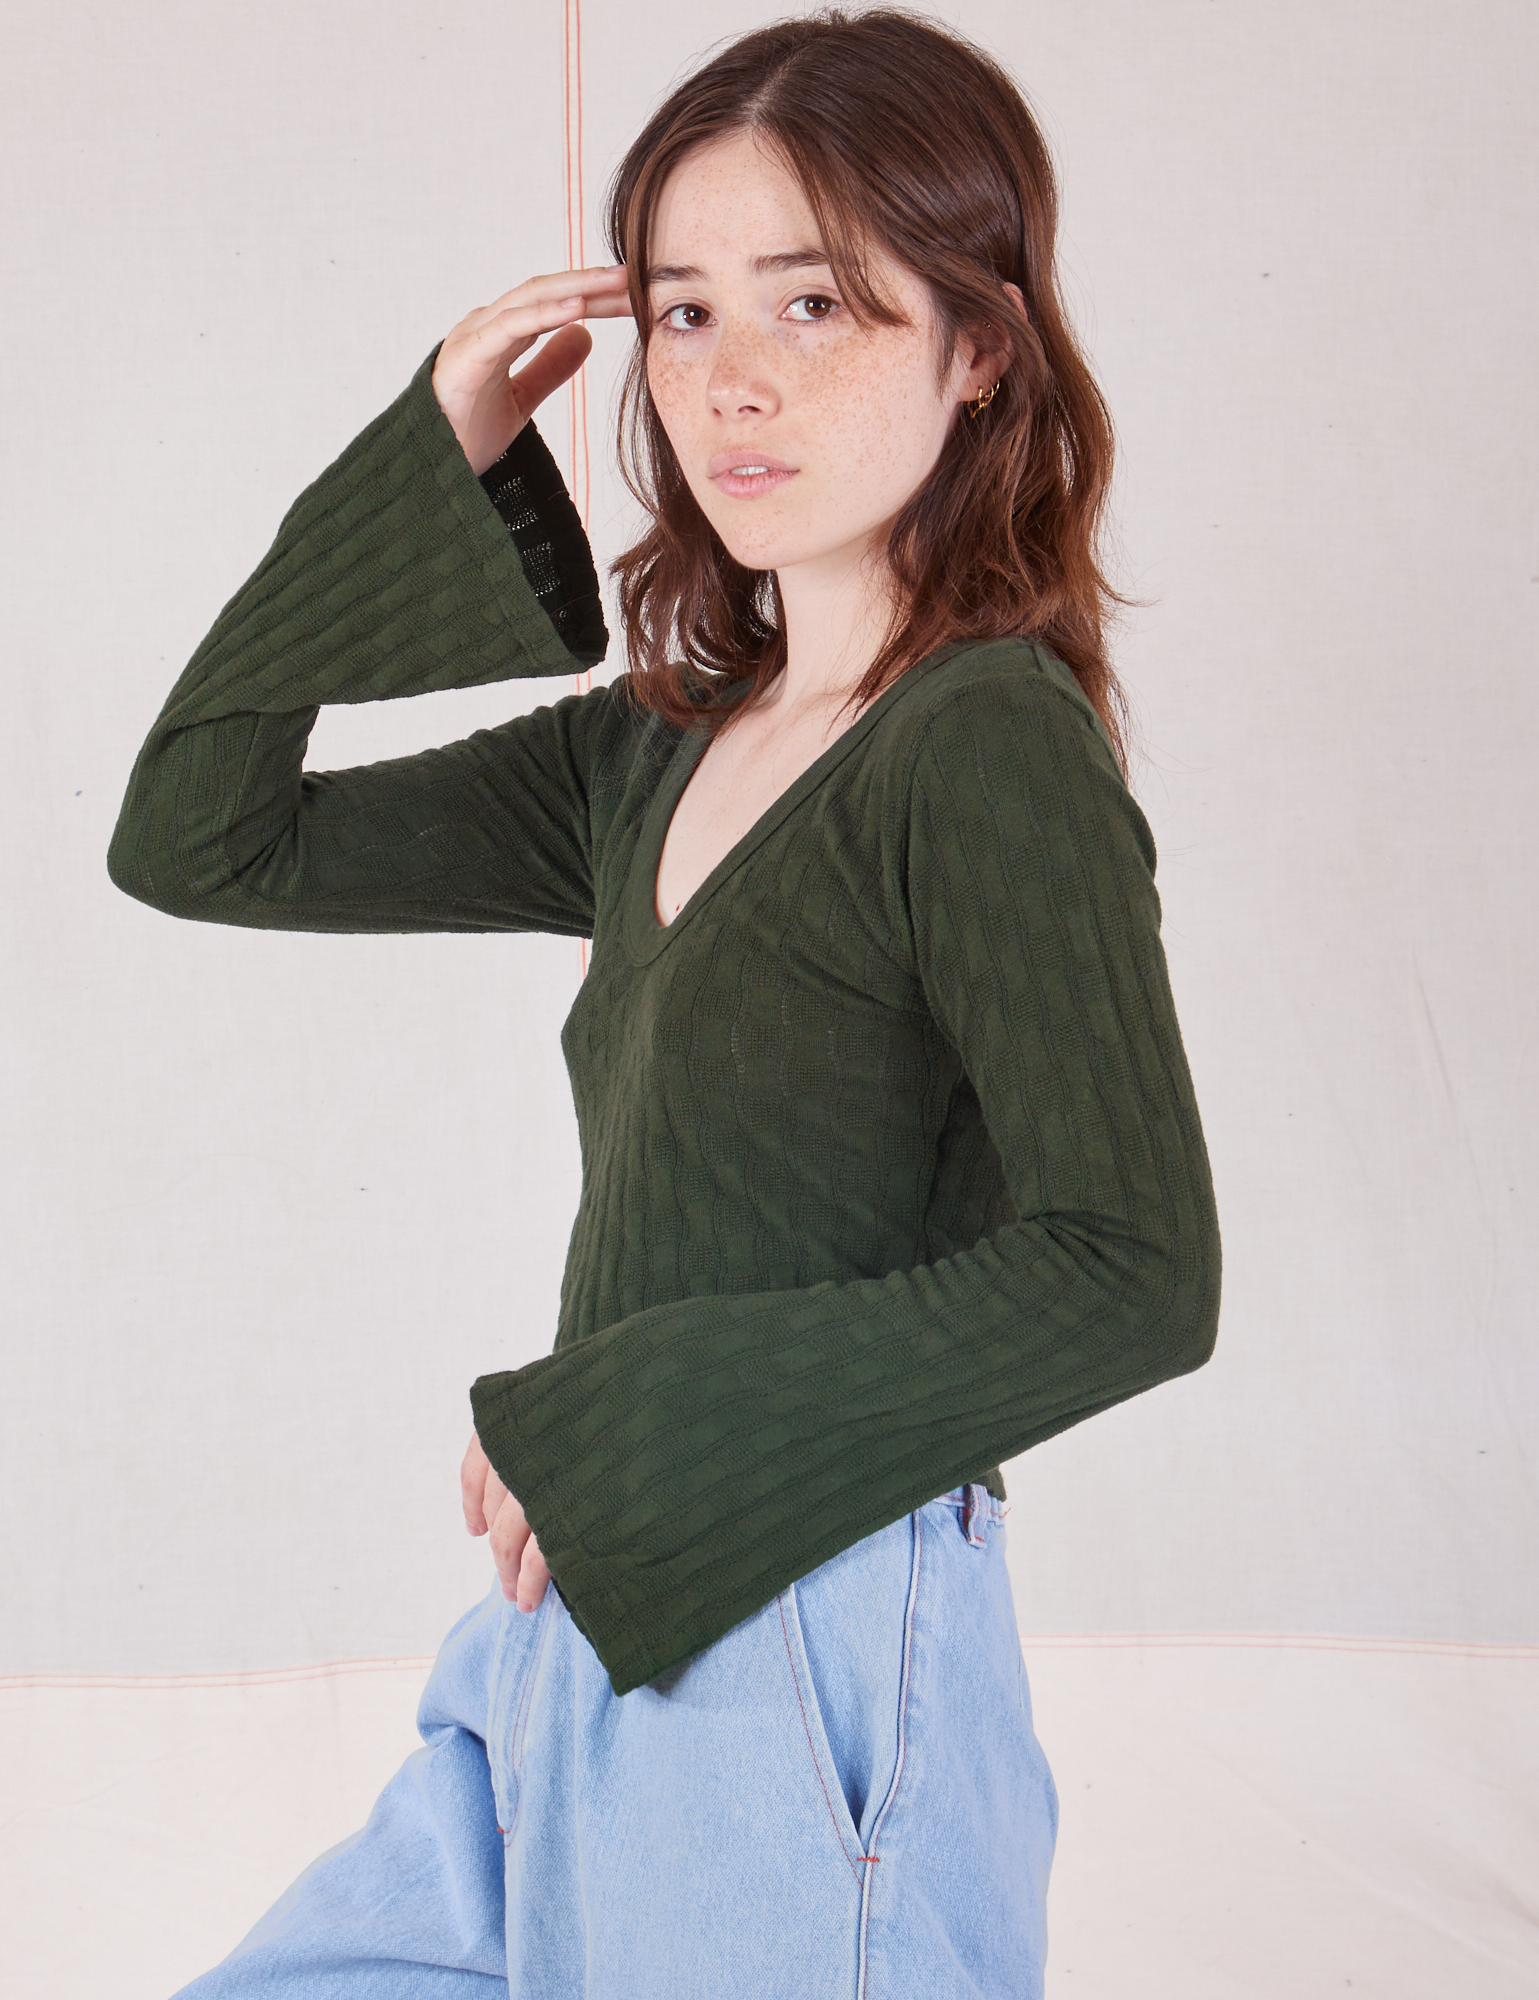 Bell Sleeve Top in Swamp Green side view on Hana